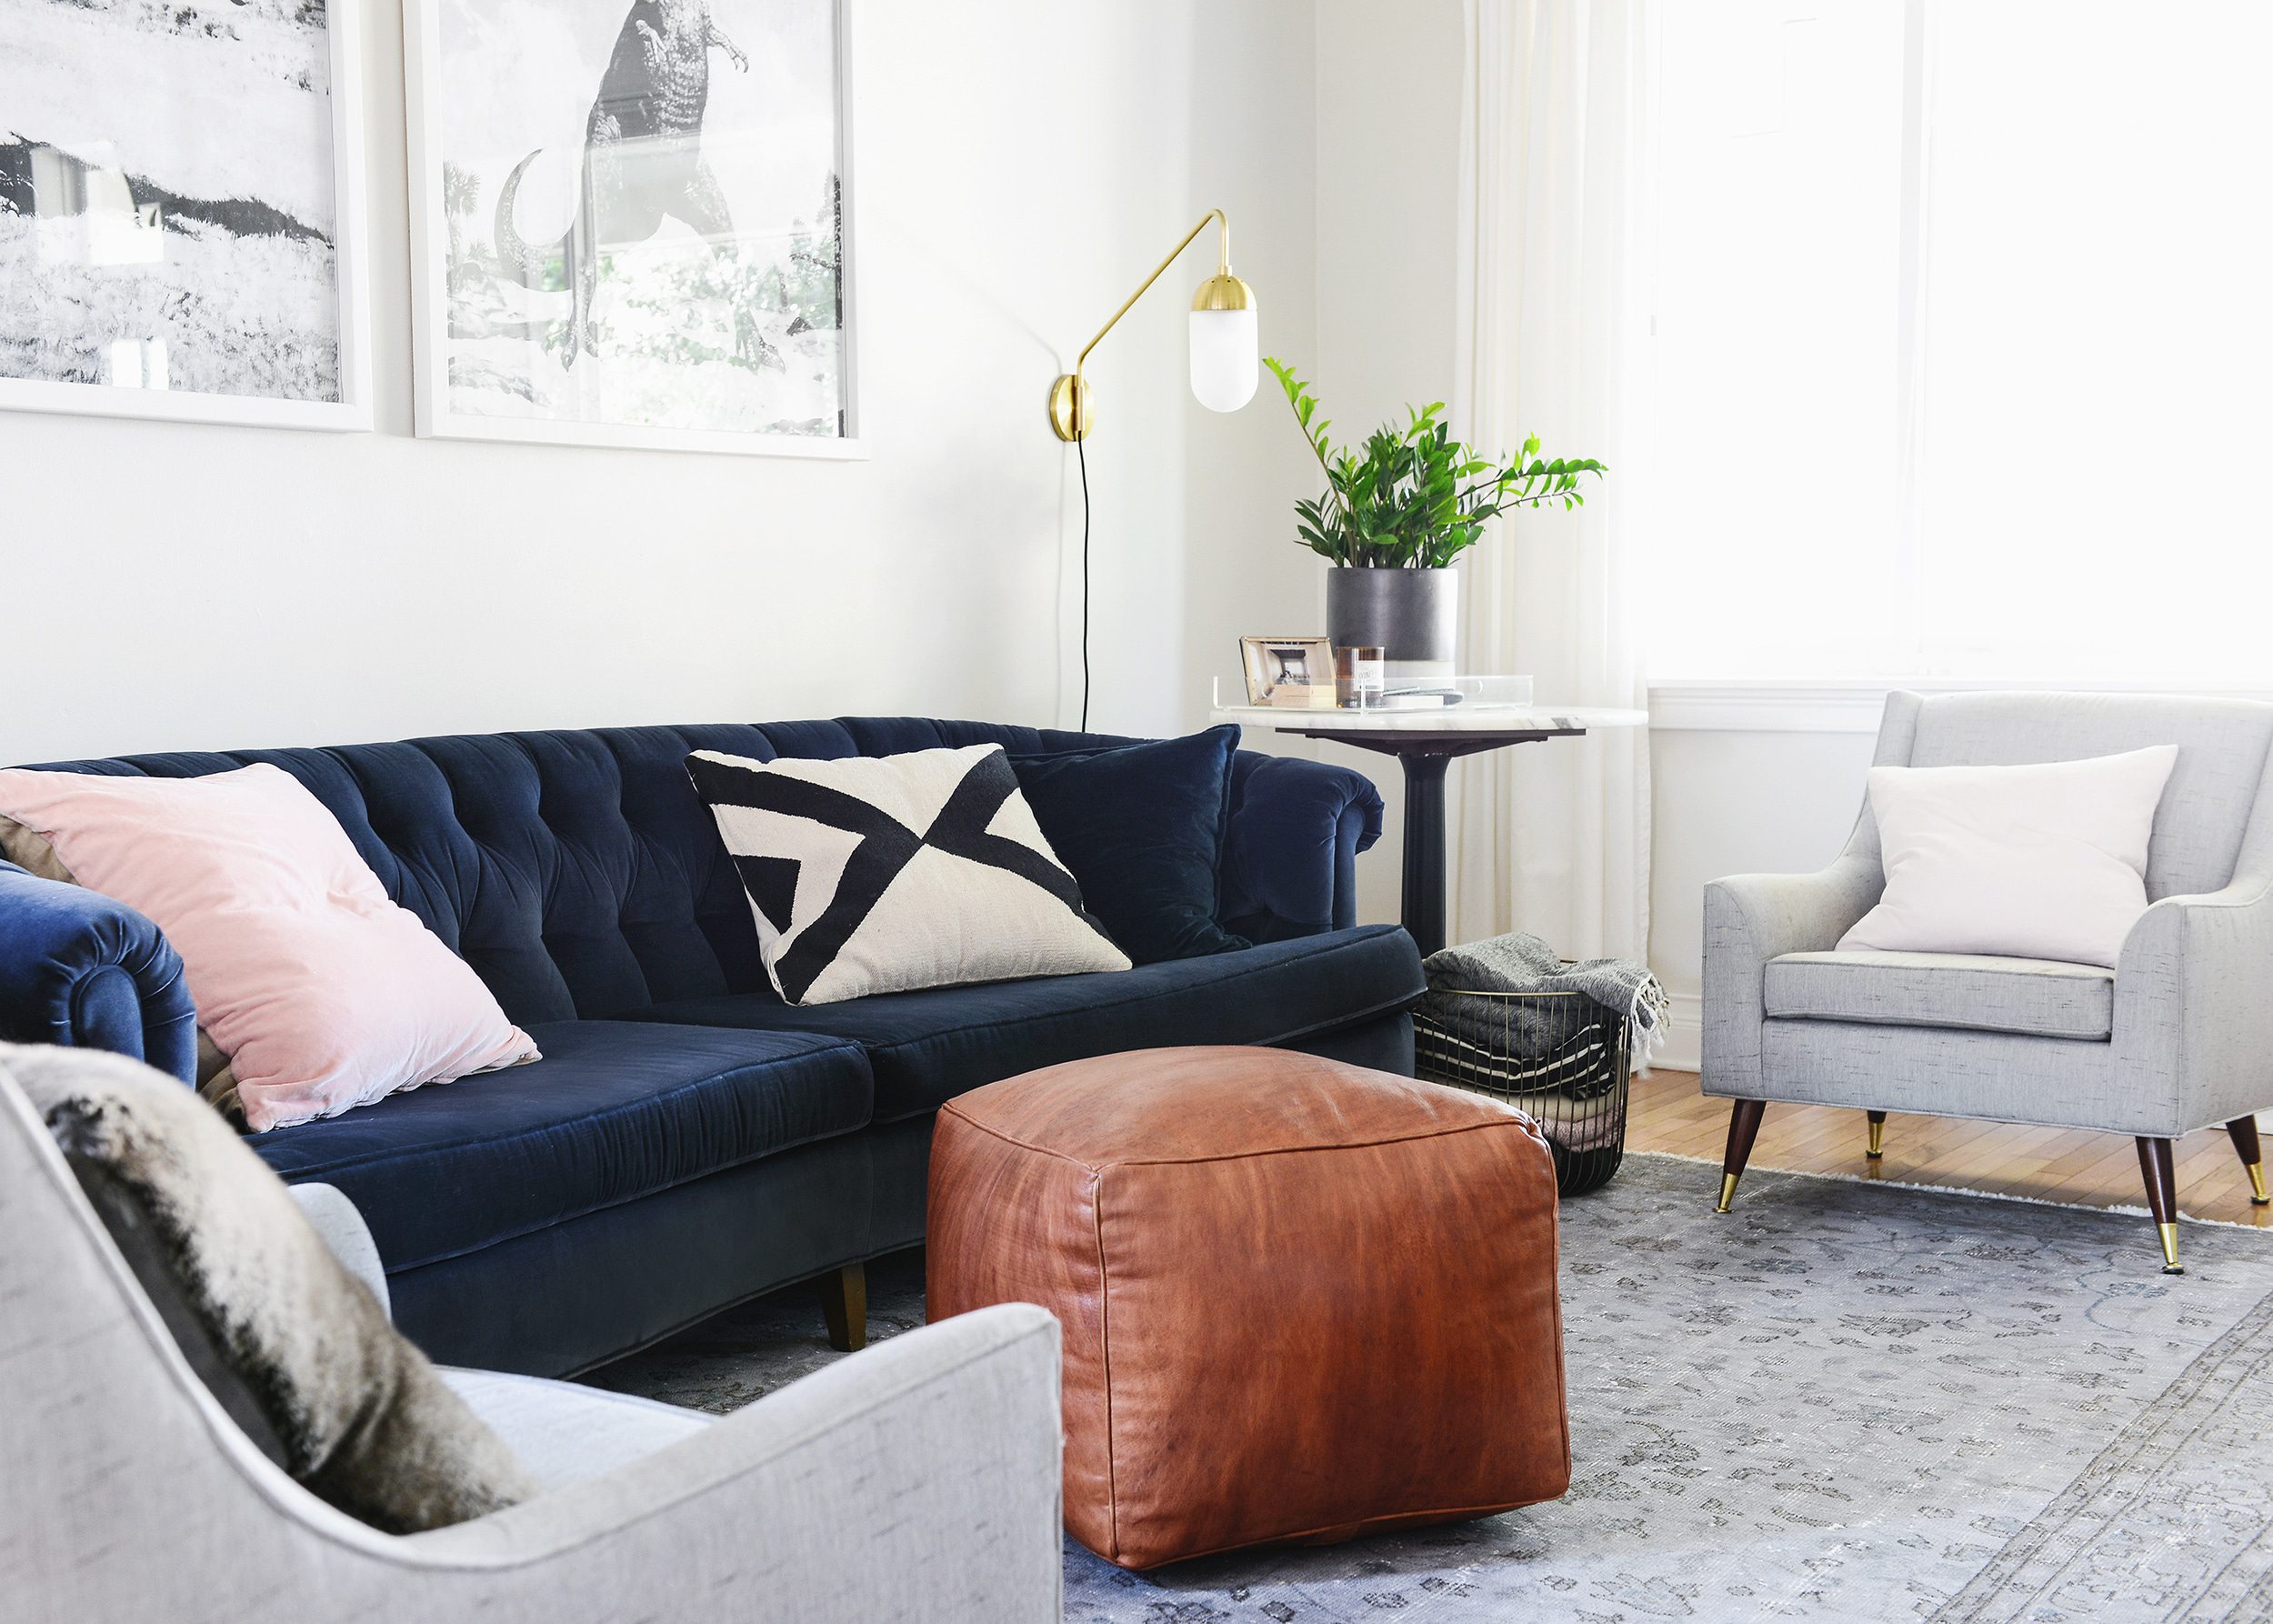 Navy velvet sofa and vintage rug with leather pouf | via Yellow Brick Home